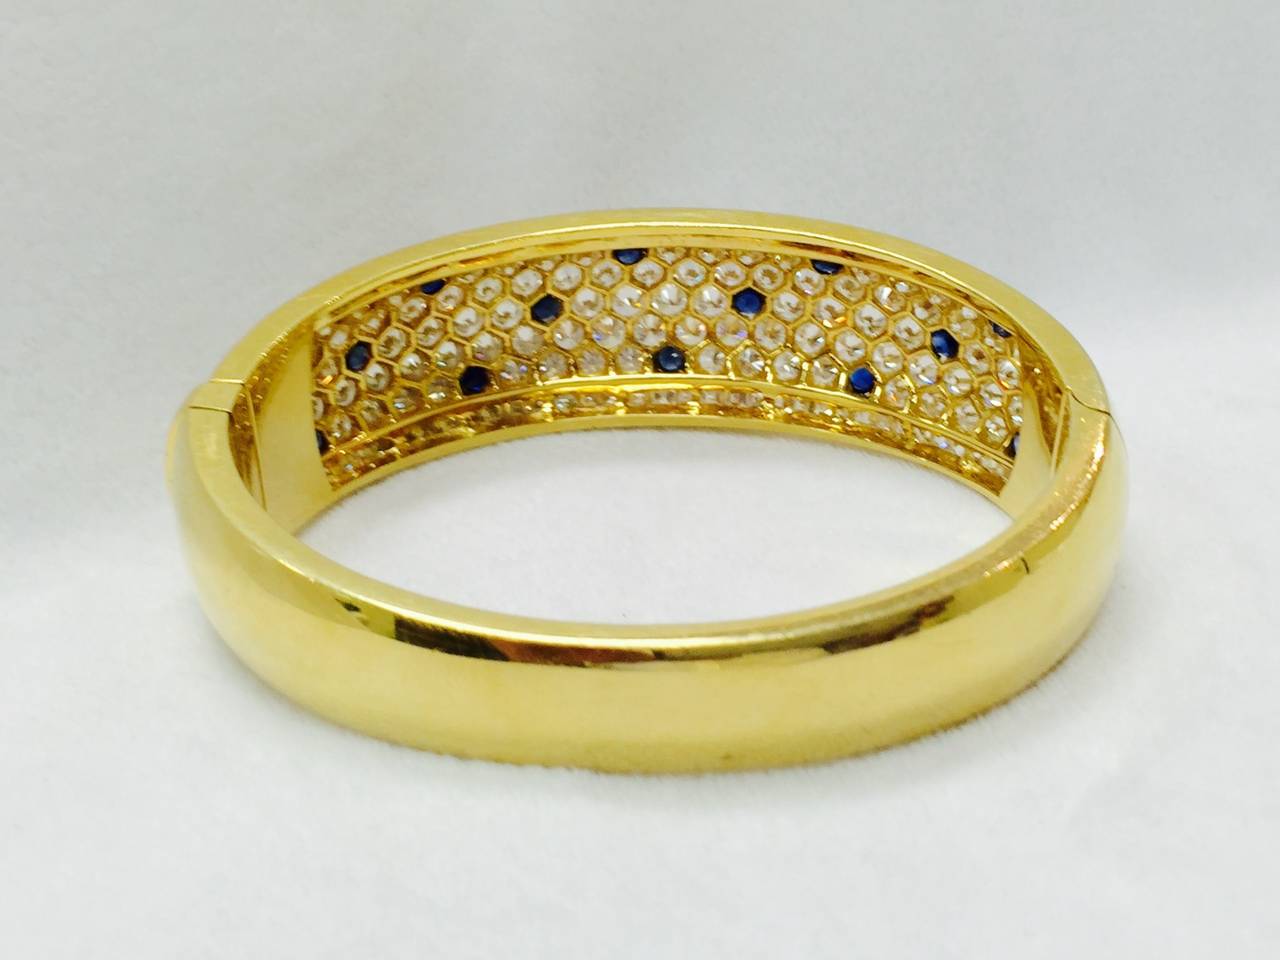 Pictures cannot do justice to this 18K Yellow Gold tapered bangle bracelet.  Individually prong set brilliant cut diamonds are colorless F grade.  Clarity an impressive VVS grade.  Adding to the play of light are channel set Princess cut diamonds on